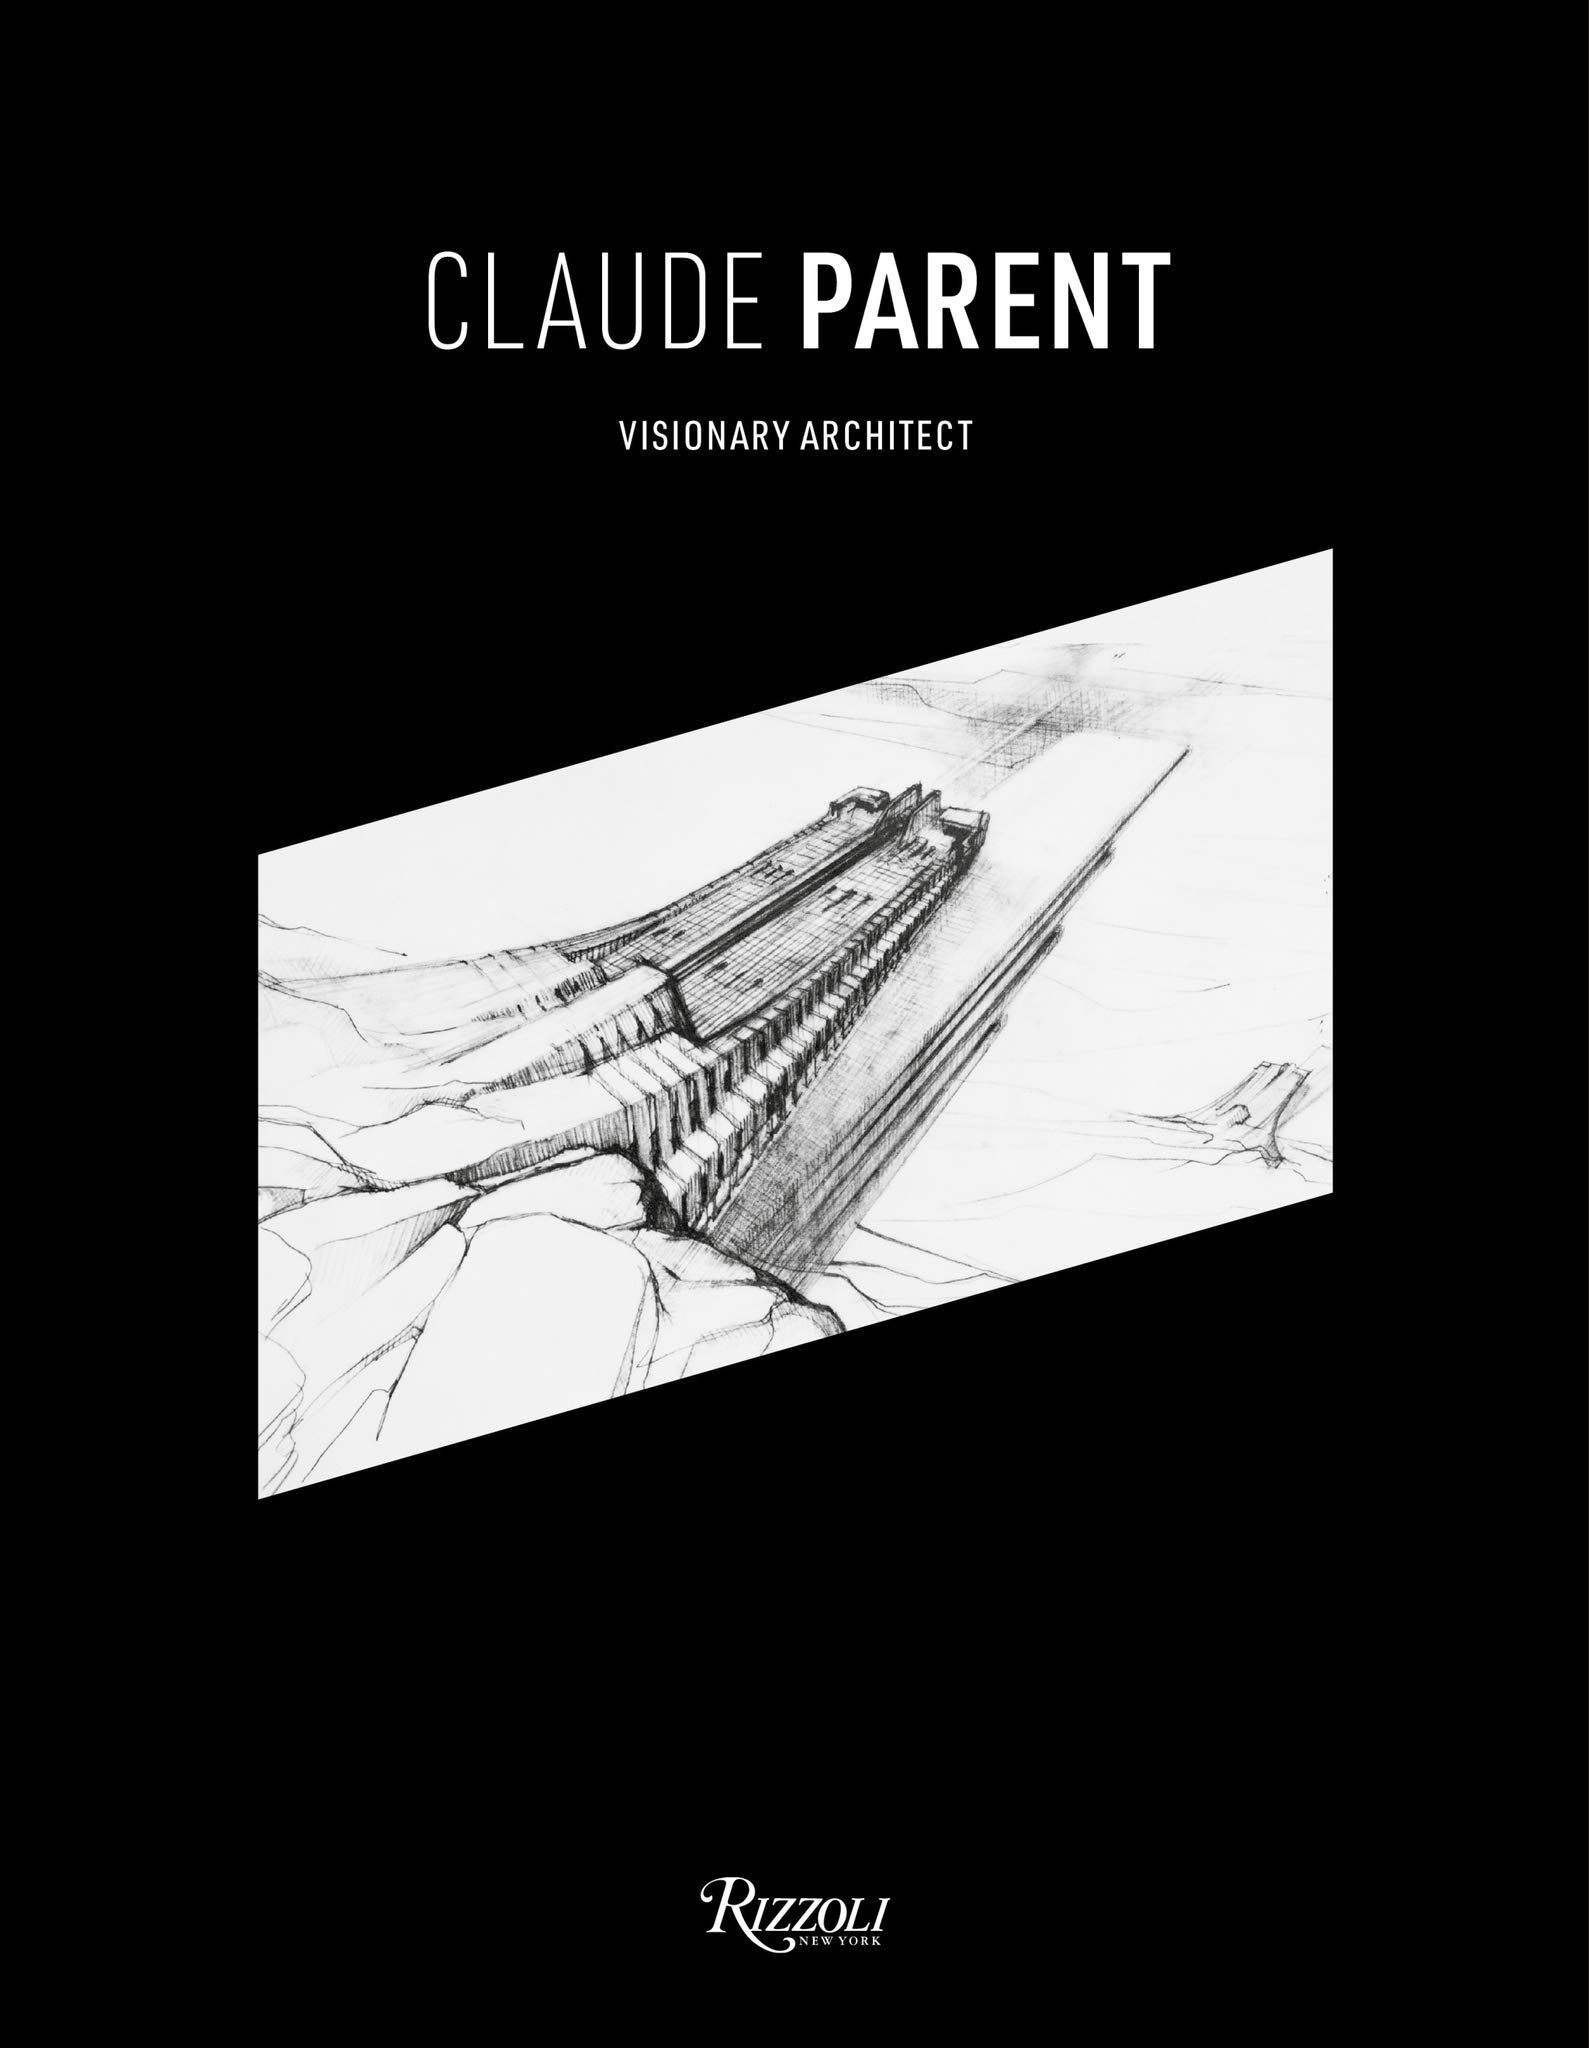 Tell It Slant: The Visionary Architecture of Claude Parent